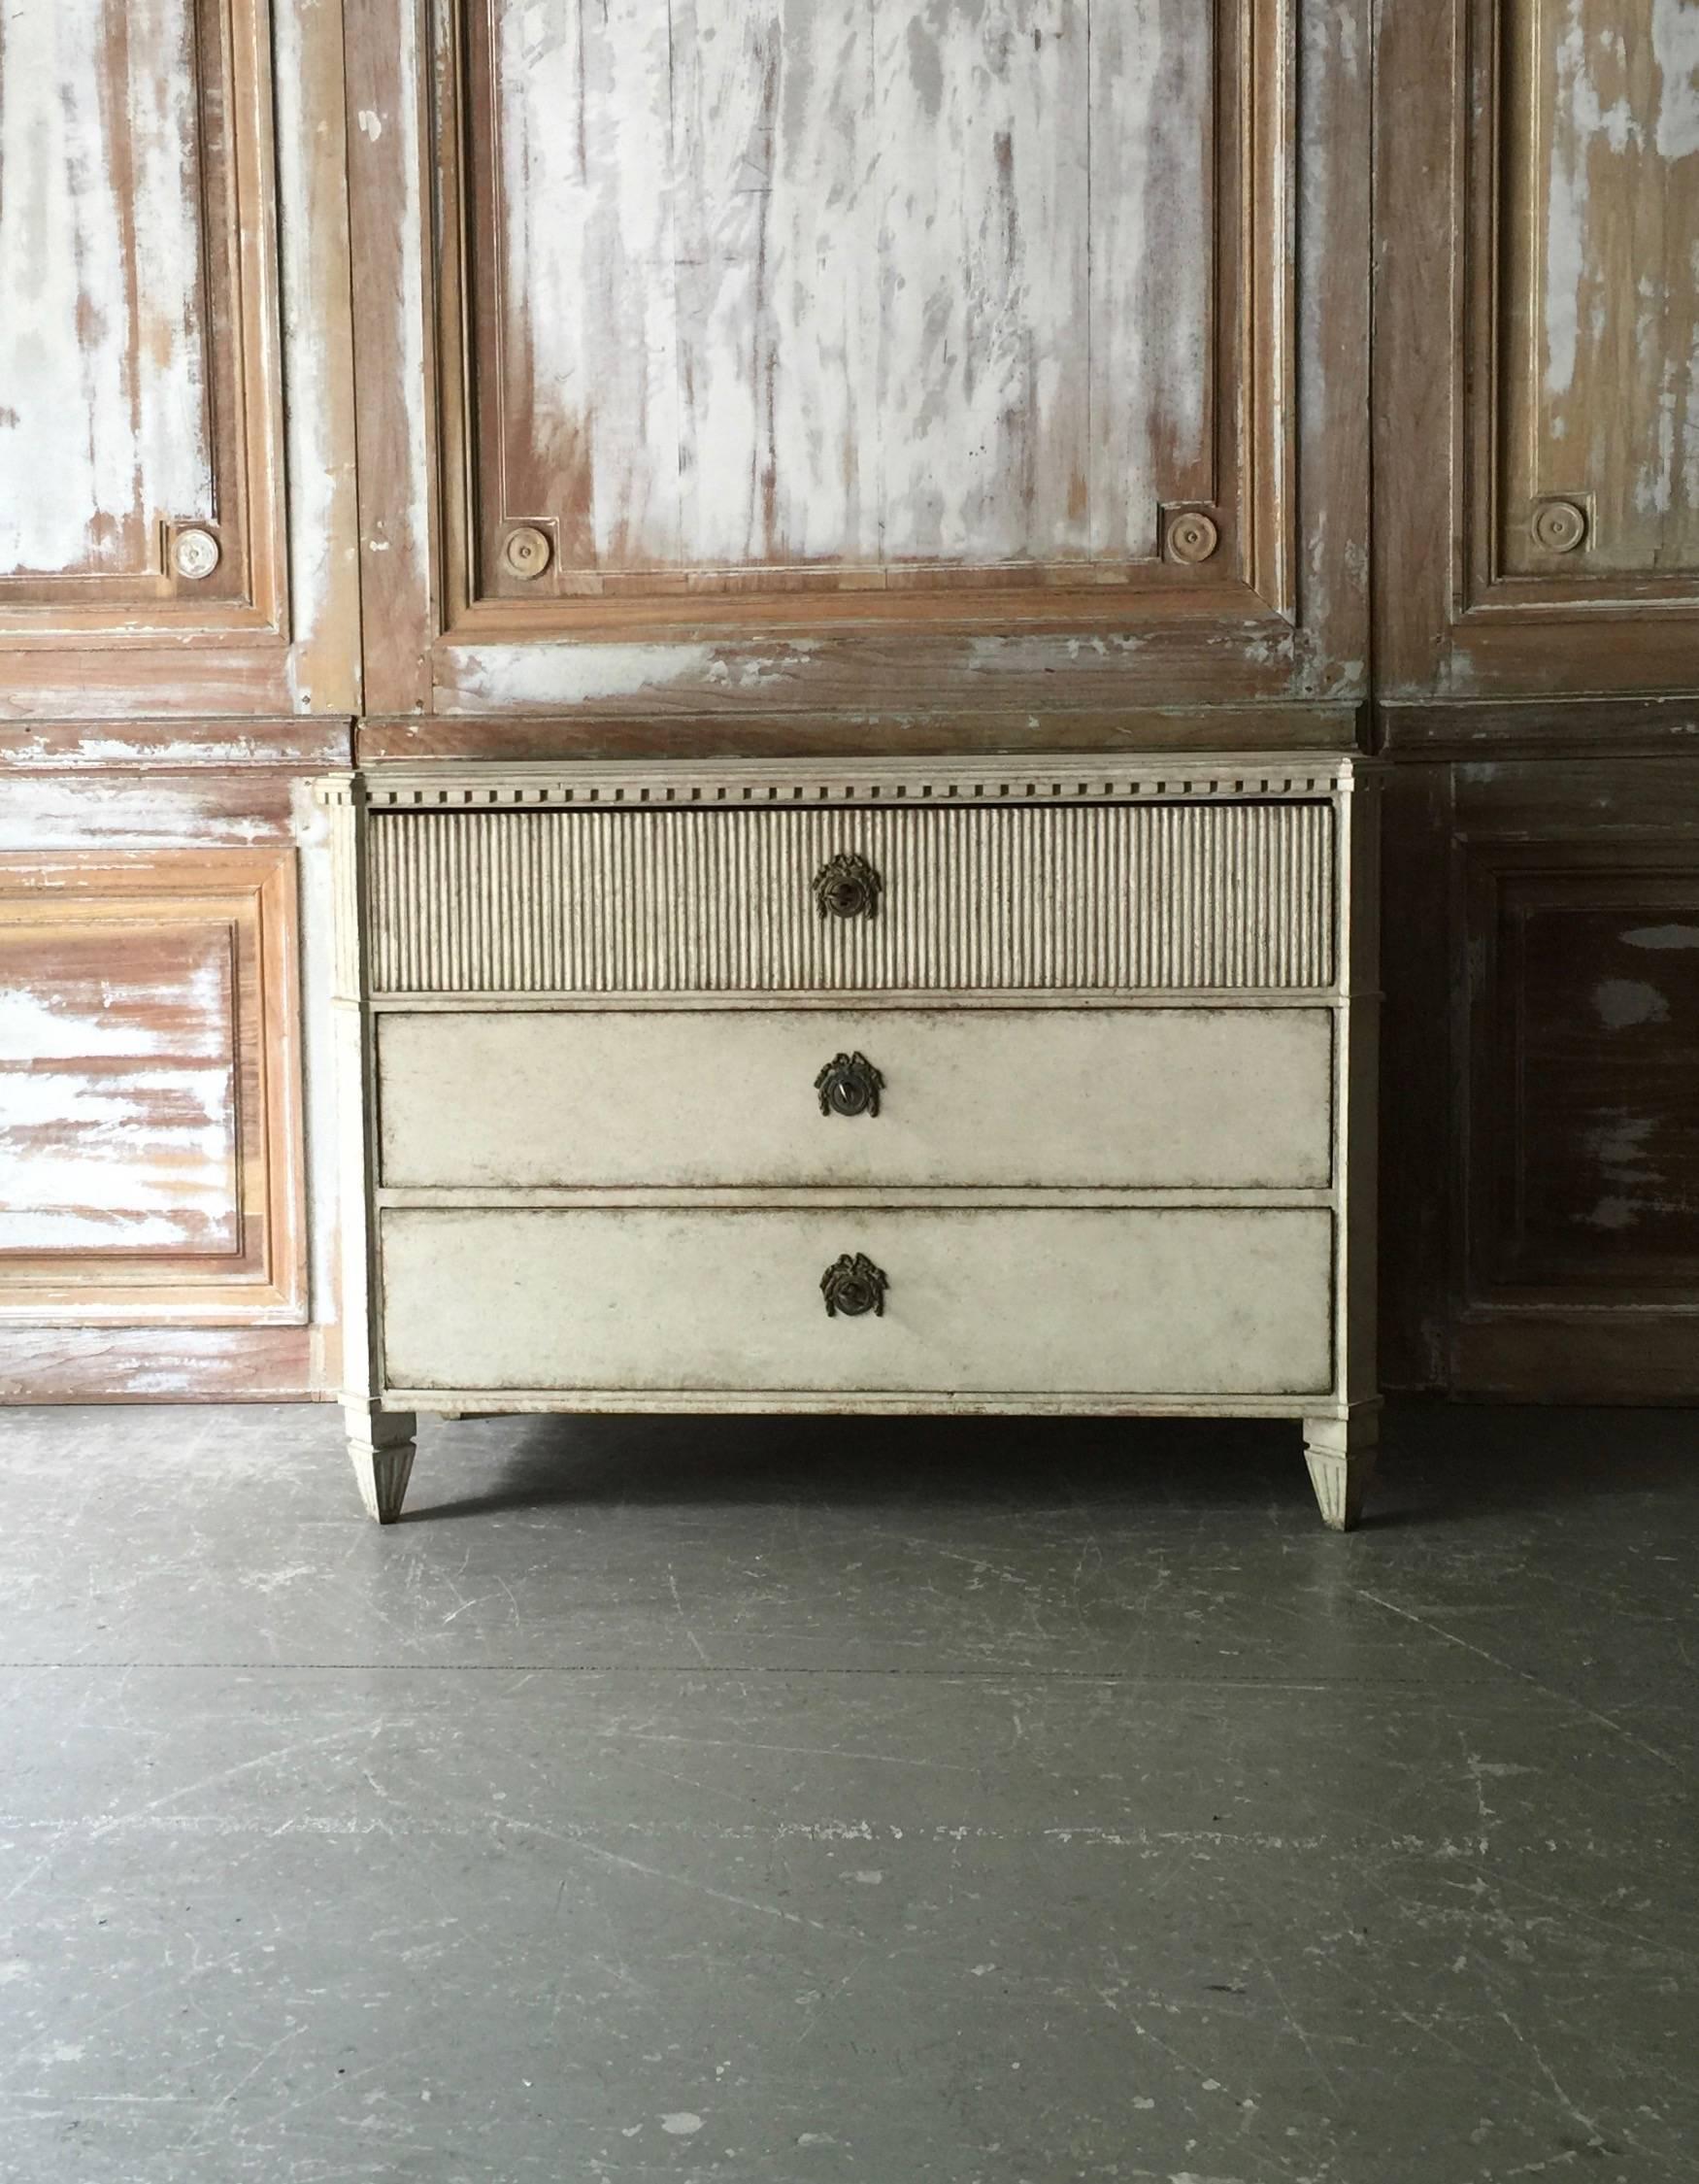 Late Gustavian period chest of drawers with fluting on front of the upper drawer. Shaped top with dental trim under, reeded canted corners and classical feet. Very classical Swedish piece with original charming hardwares,
Sweden, circa